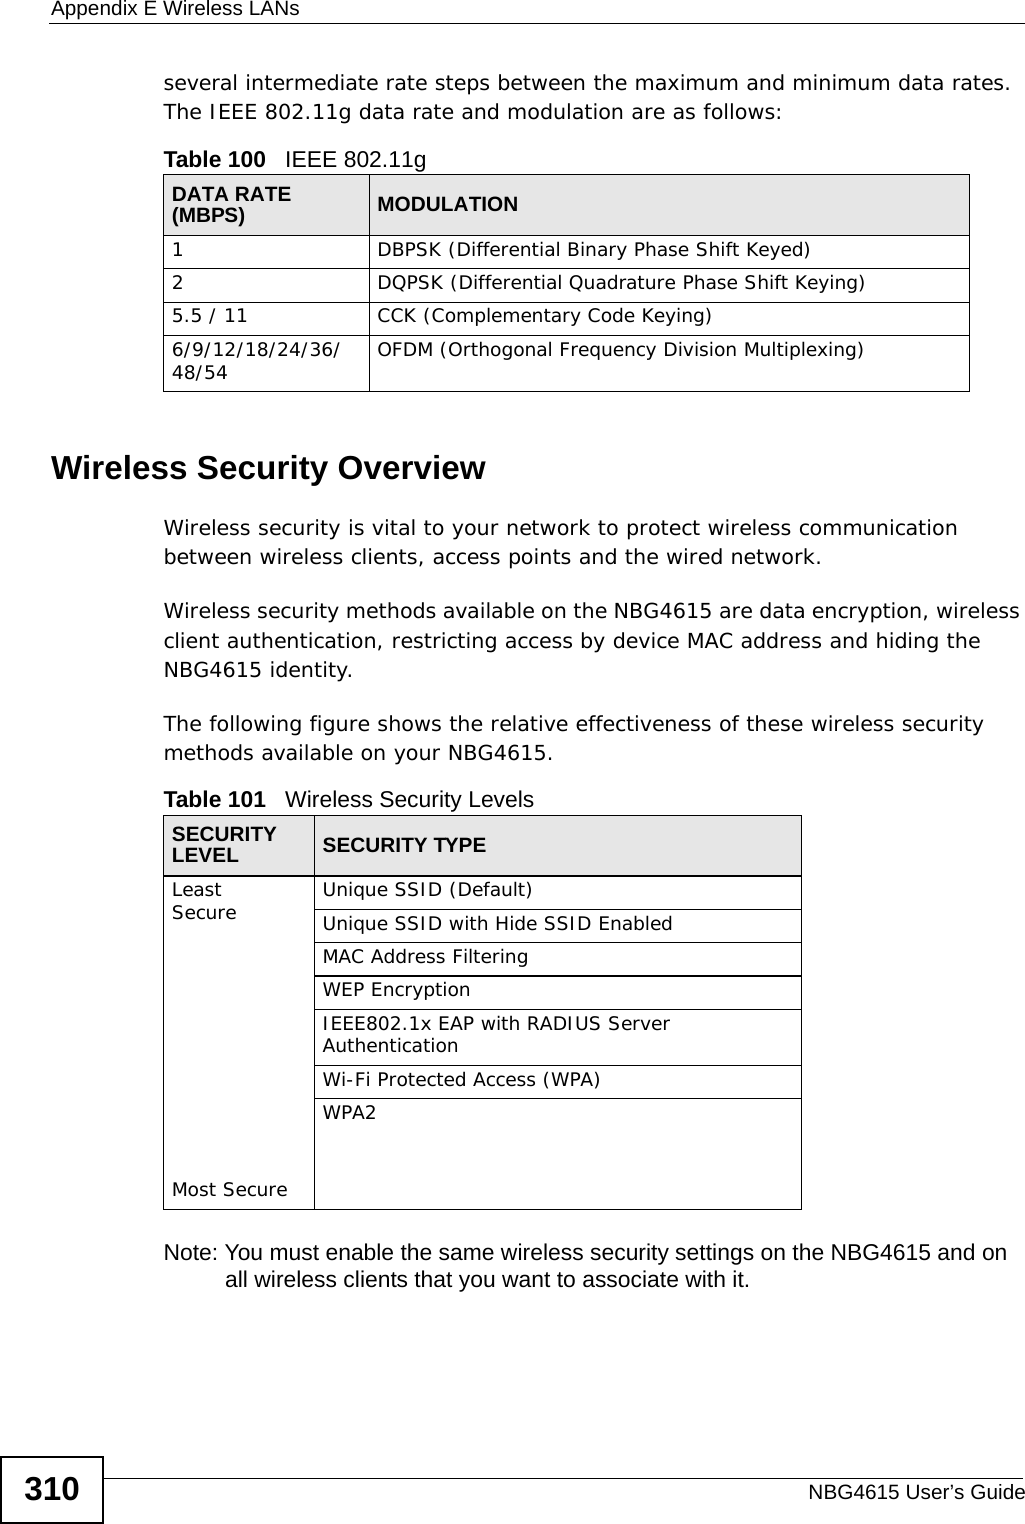 Appendix E Wireless LANsNBG4615 User’s Guide310several intermediate rate steps between the maximum and minimum data rates. The IEEE 802.11g data rate and modulation are as follows:Wireless Security OverviewWireless security is vital to your network to protect wireless communication between wireless clients, access points and the wired network.Wireless security methods available on the NBG4615 are data encryption, wireless client authentication, restricting access by device MAC address and hiding the NBG4615 identity.The following figure shows the relative effectiveness of these wireless security methods available on your NBG4615.Note: You must enable the same wireless security settings on the NBG4615 and on all wireless clients that you want to associate with it. Table 100   IEEE 802.11gDATA RATE (MBPS) MODULATION1 DBPSK (Differential Binary Phase Shift Keyed)2 DQPSK (Differential Quadrature Phase Shift Keying)5.5 / 11 CCK (Complementary Code Keying) 6/9/12/18/24/36/48/54 OFDM (Orthogonal Frequency Division Multiplexing) Table 101   Wireless Security LevelsSECURITY LEVEL SECURITY TYPELeast       Secure                                                                                  Most SecureUnique SSID (Default)Unique SSID with Hide SSID EnabledMAC Address FilteringWEP EncryptionIEEE802.1x EAP with RADIUS Server AuthenticationWi-Fi Protected Access (WPA)WPA2